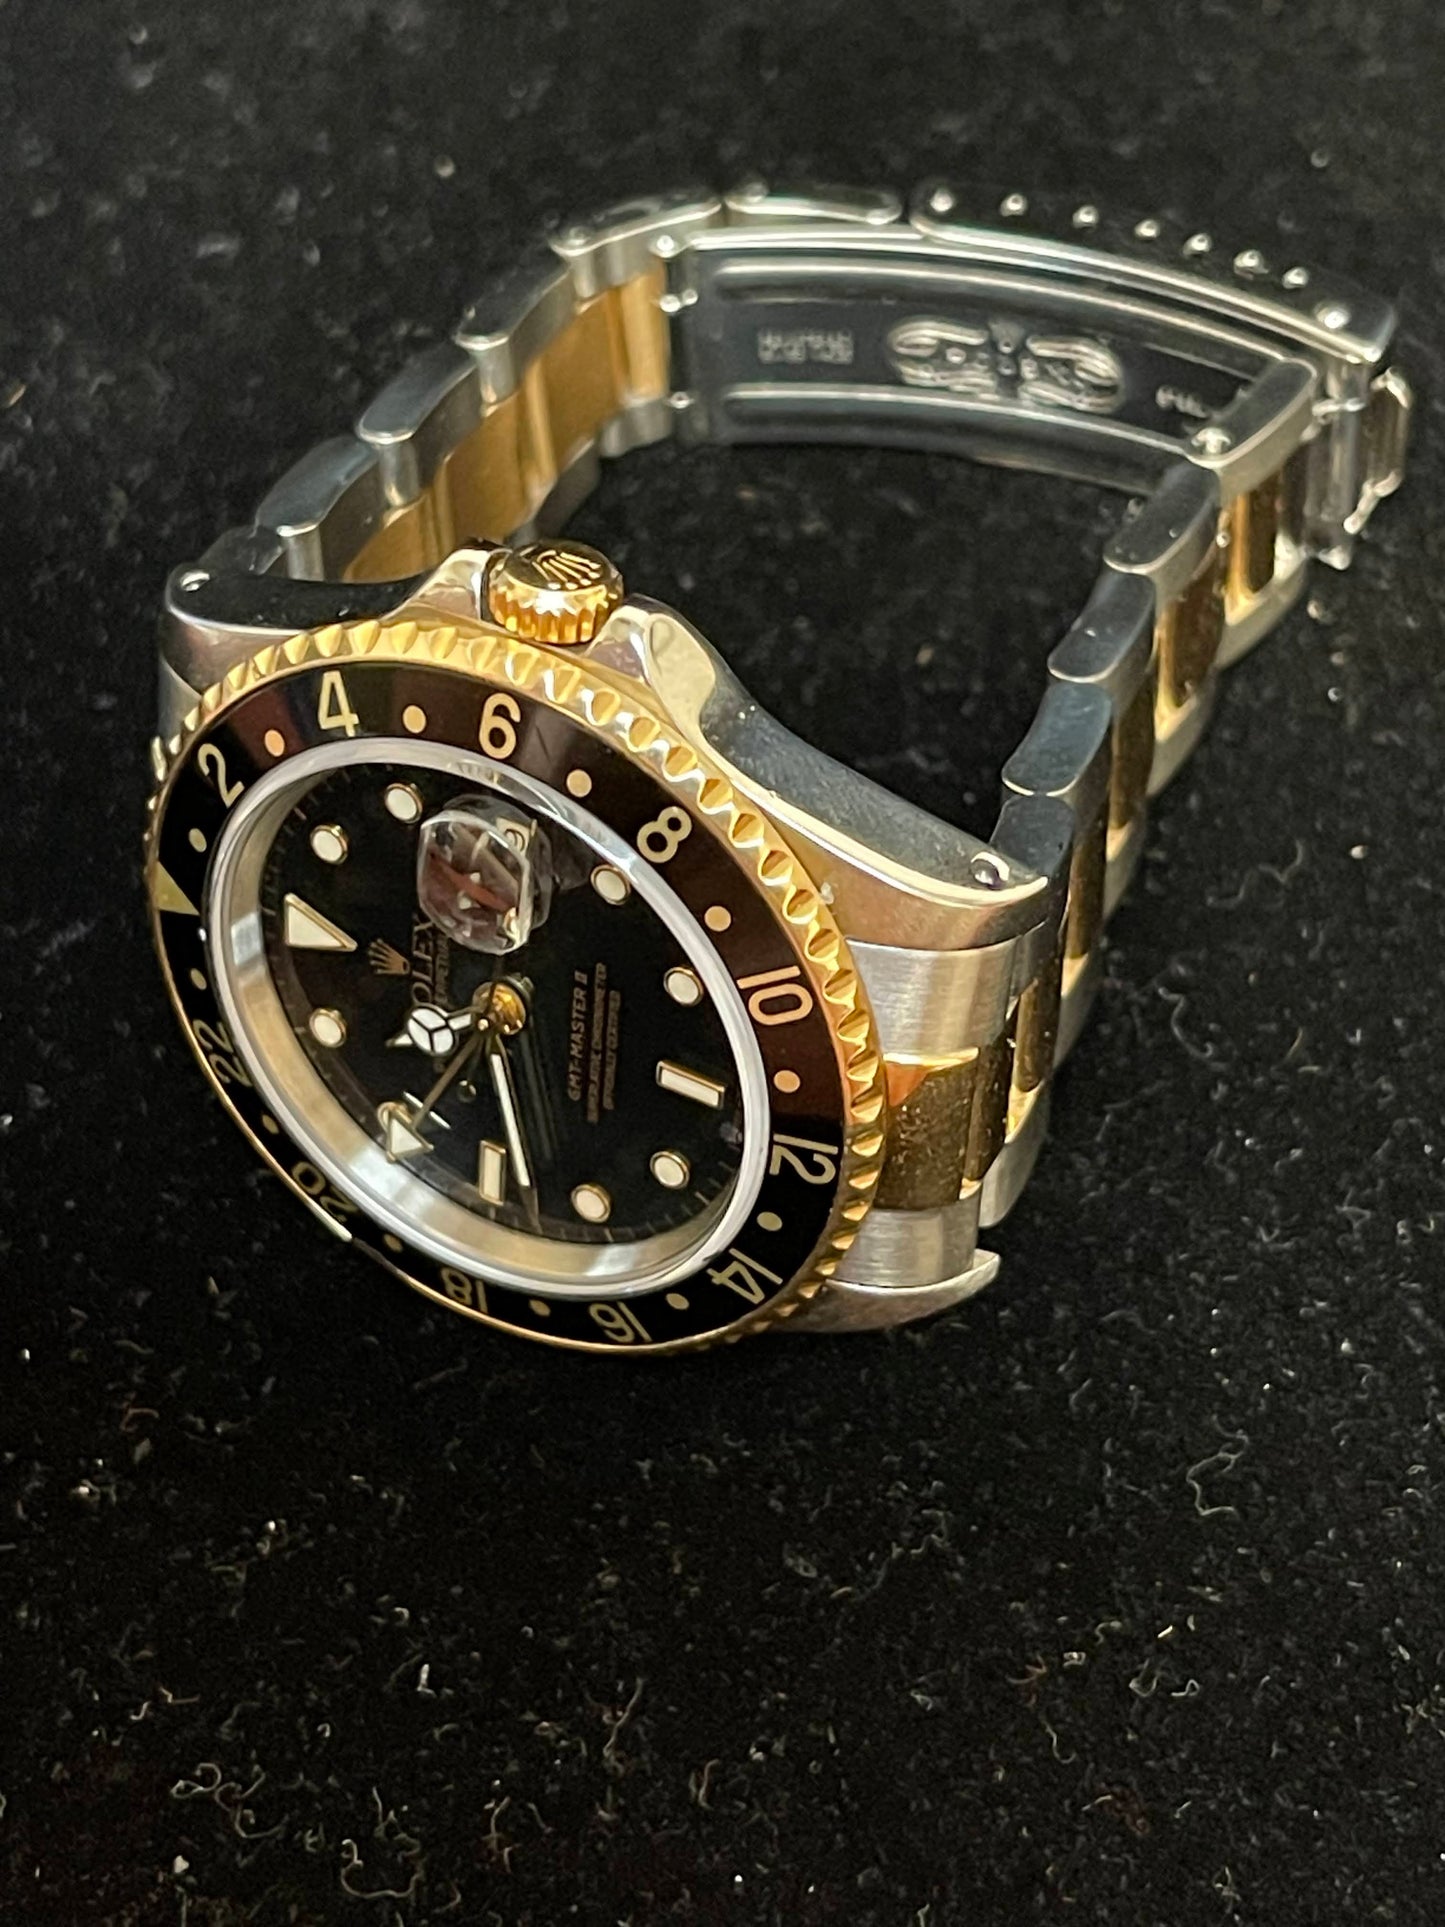 1991 Rolex GMT Master II 16713 Black Dial TT Oyster No Papers 40mm